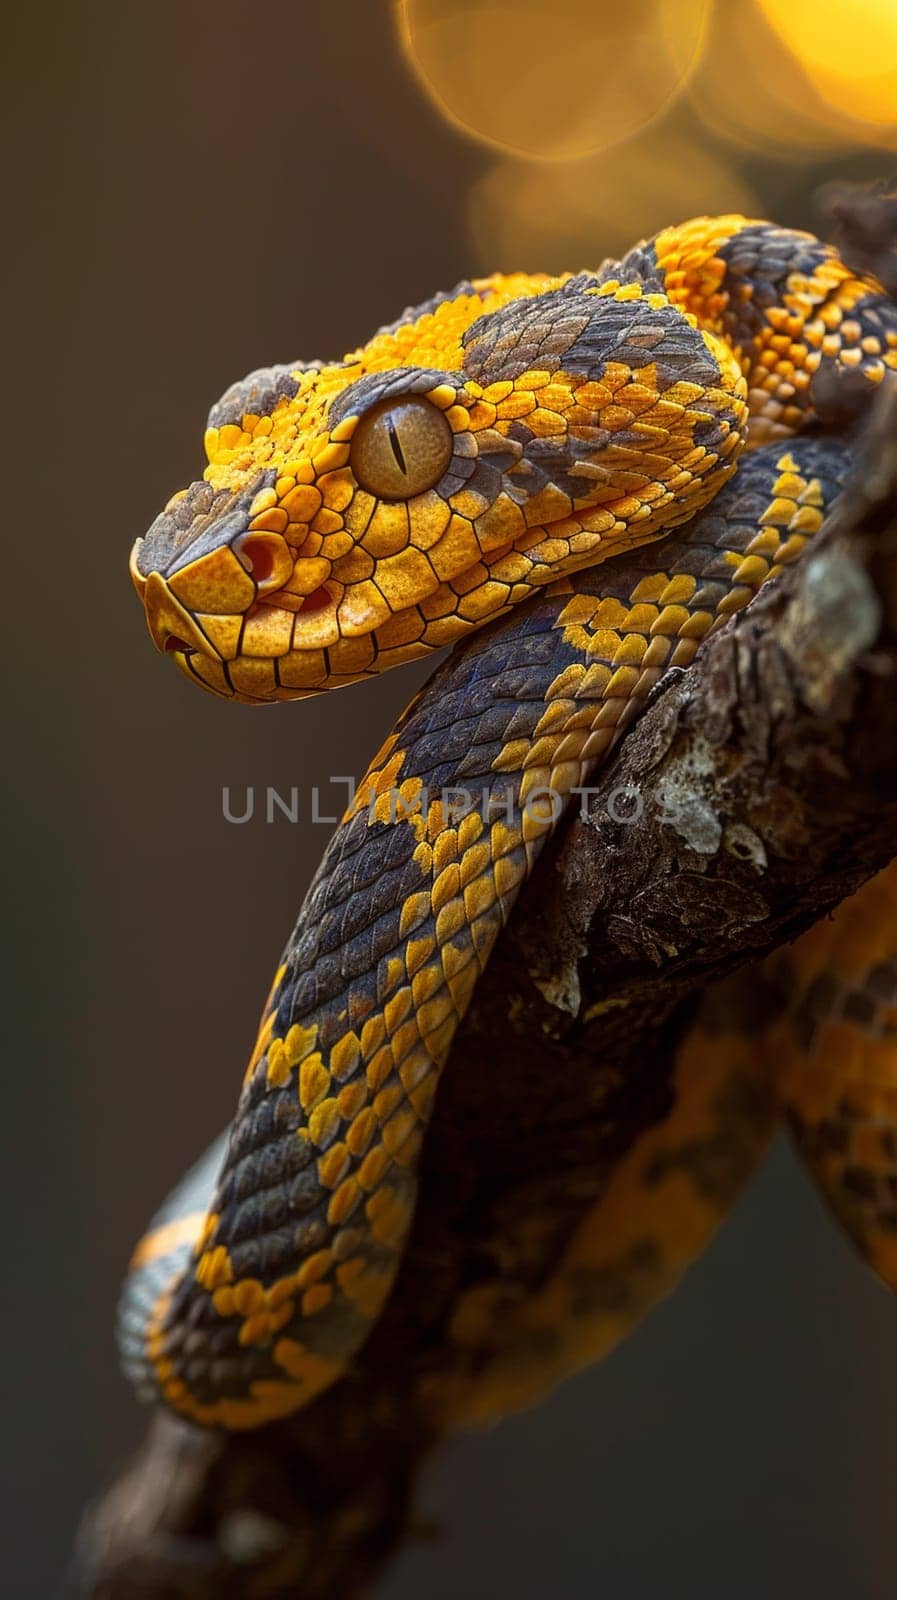 A close up of a snake on top of a tree branch